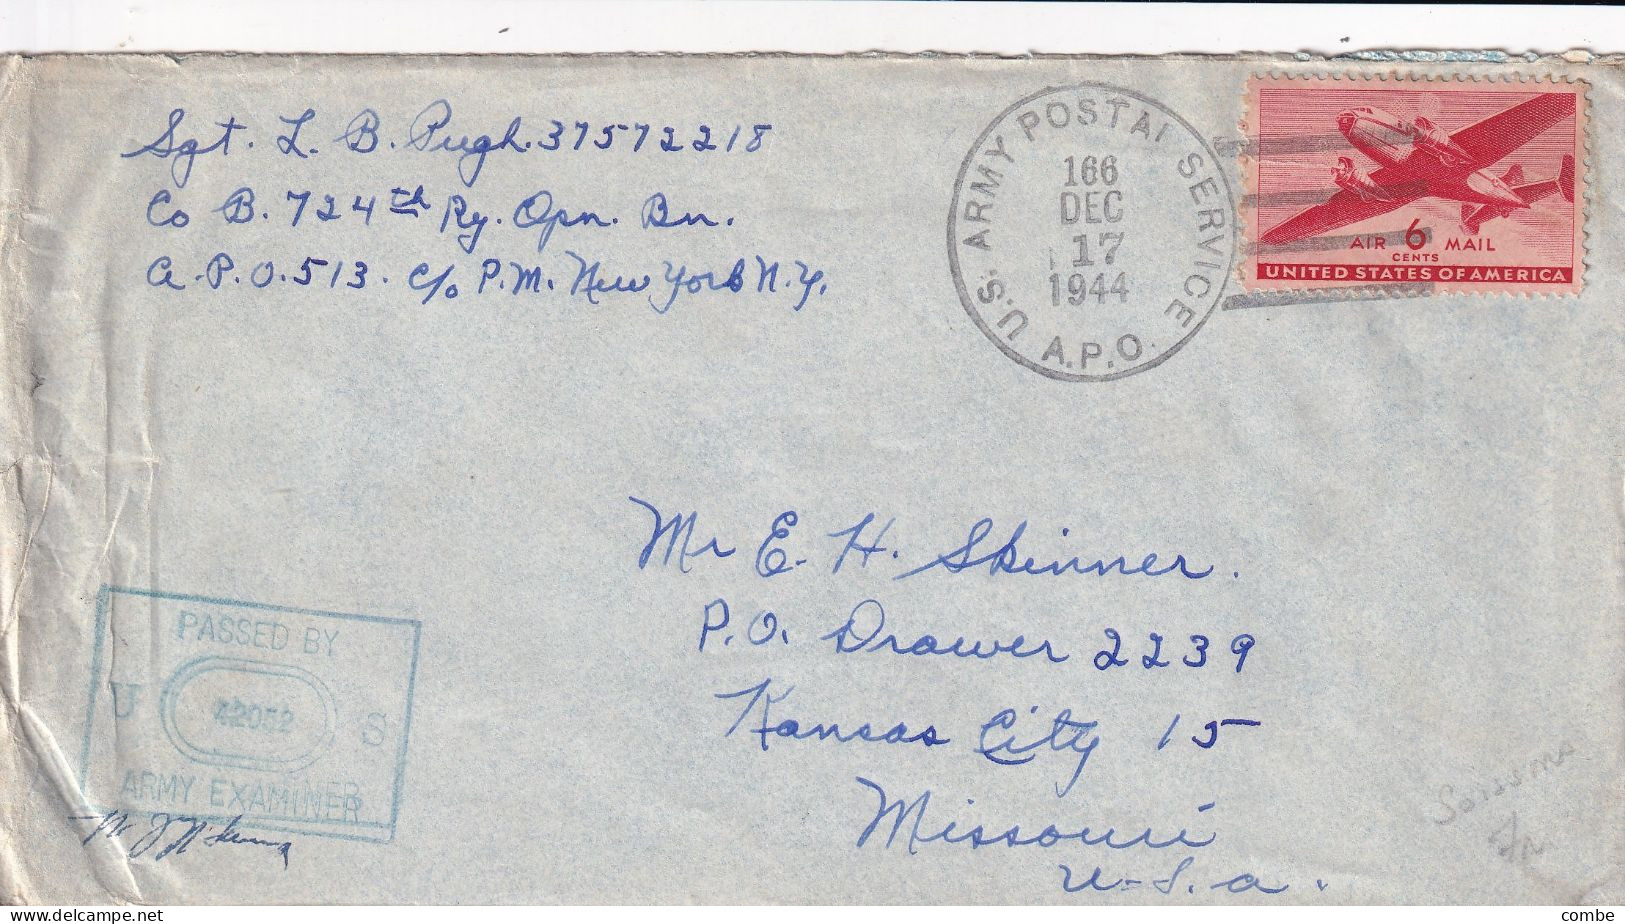 COVER. 17 DEC 1944. APO 166. SOISSONS FRANCE. PASSED BY EXAMINER. TO BALTIMORE - Cartas & Documentos